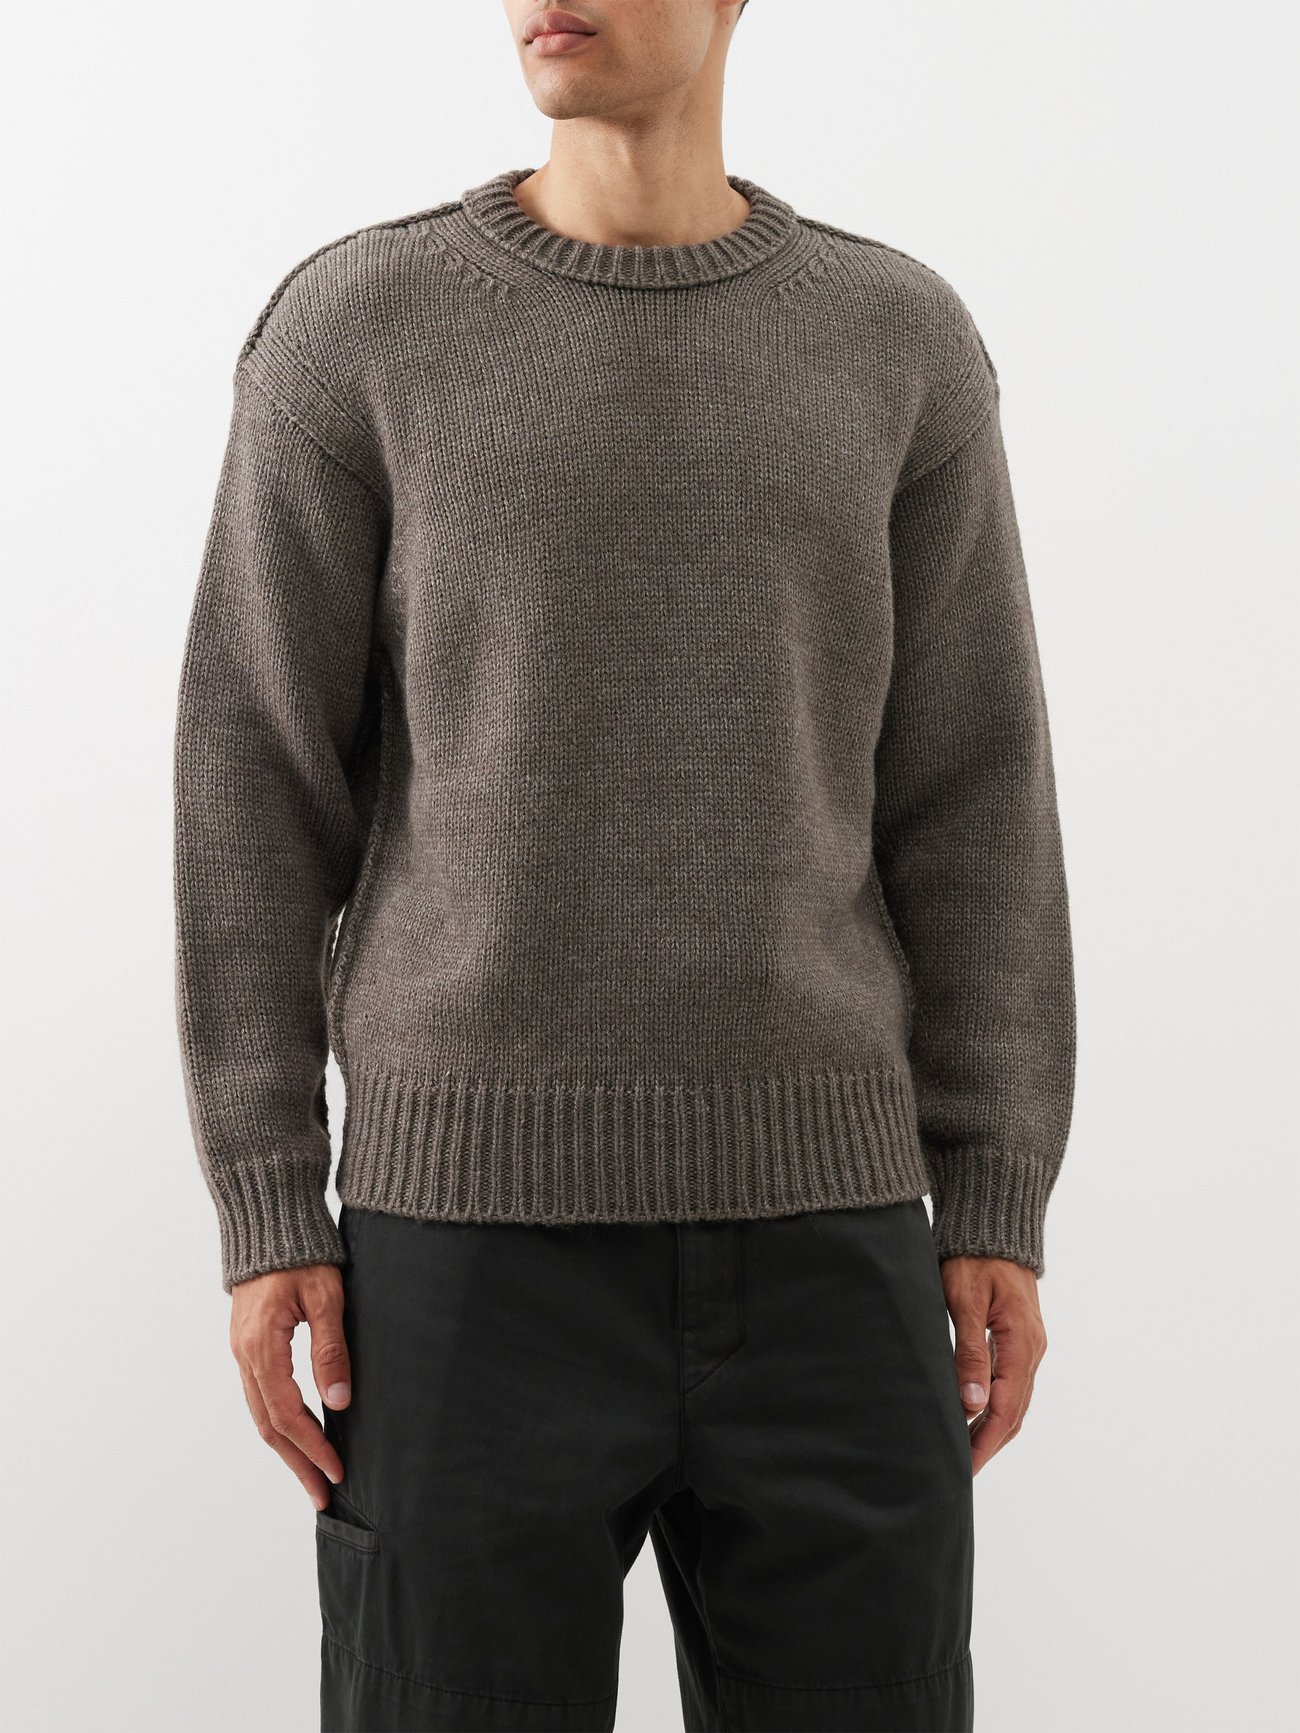 LEMAIRE Boxy Knitted Sweater | Endource